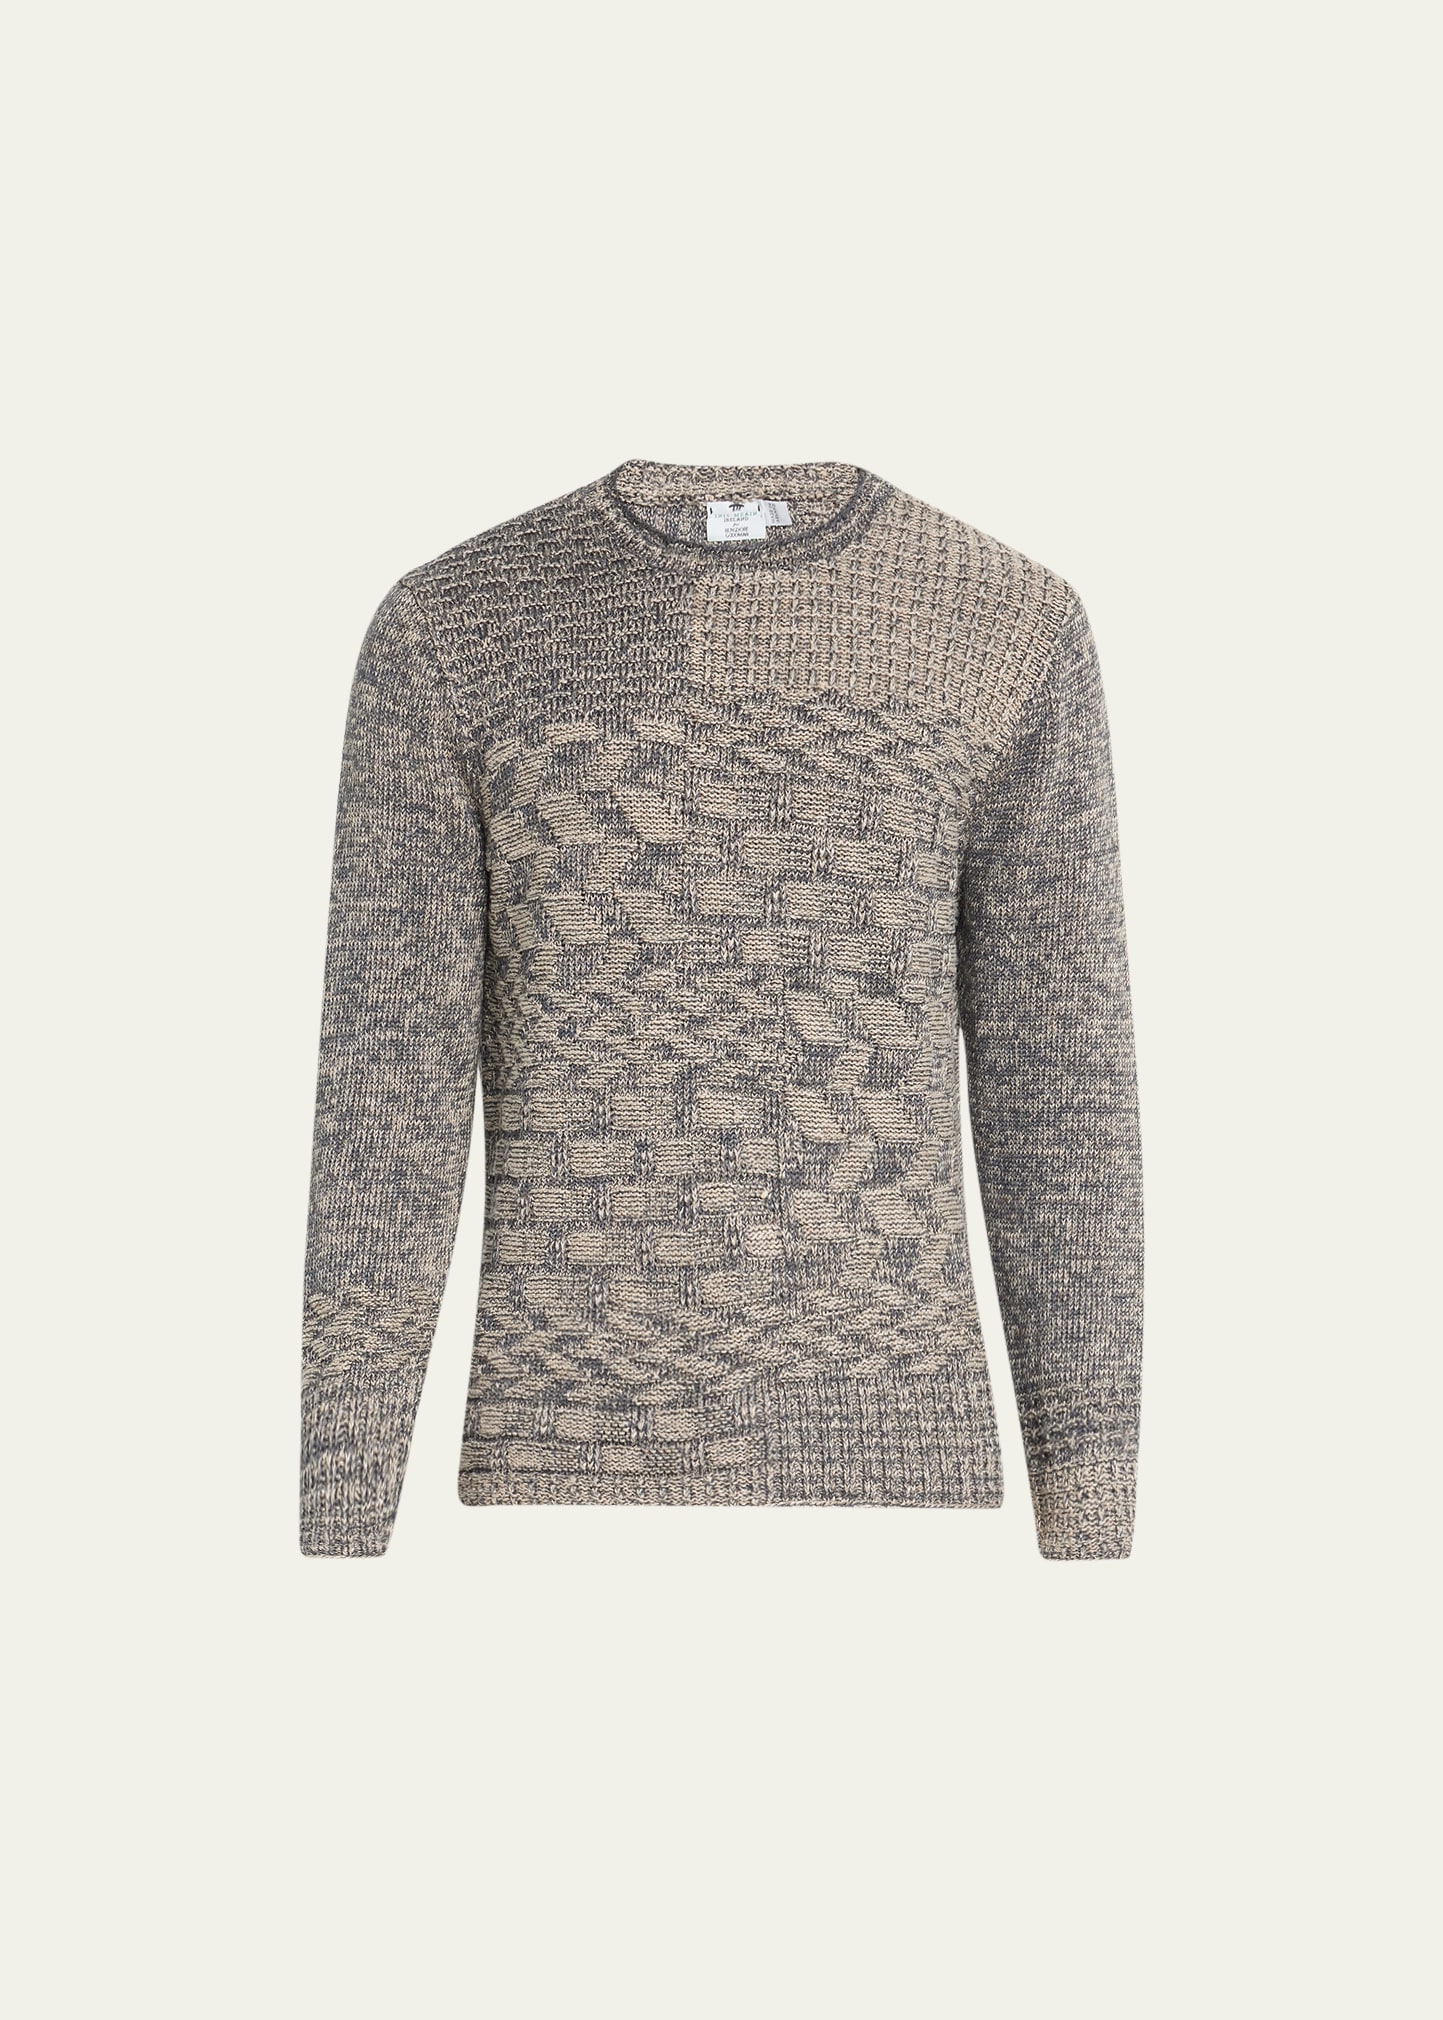 Inis Meain Men's Linen Stonewall Crew Sweater